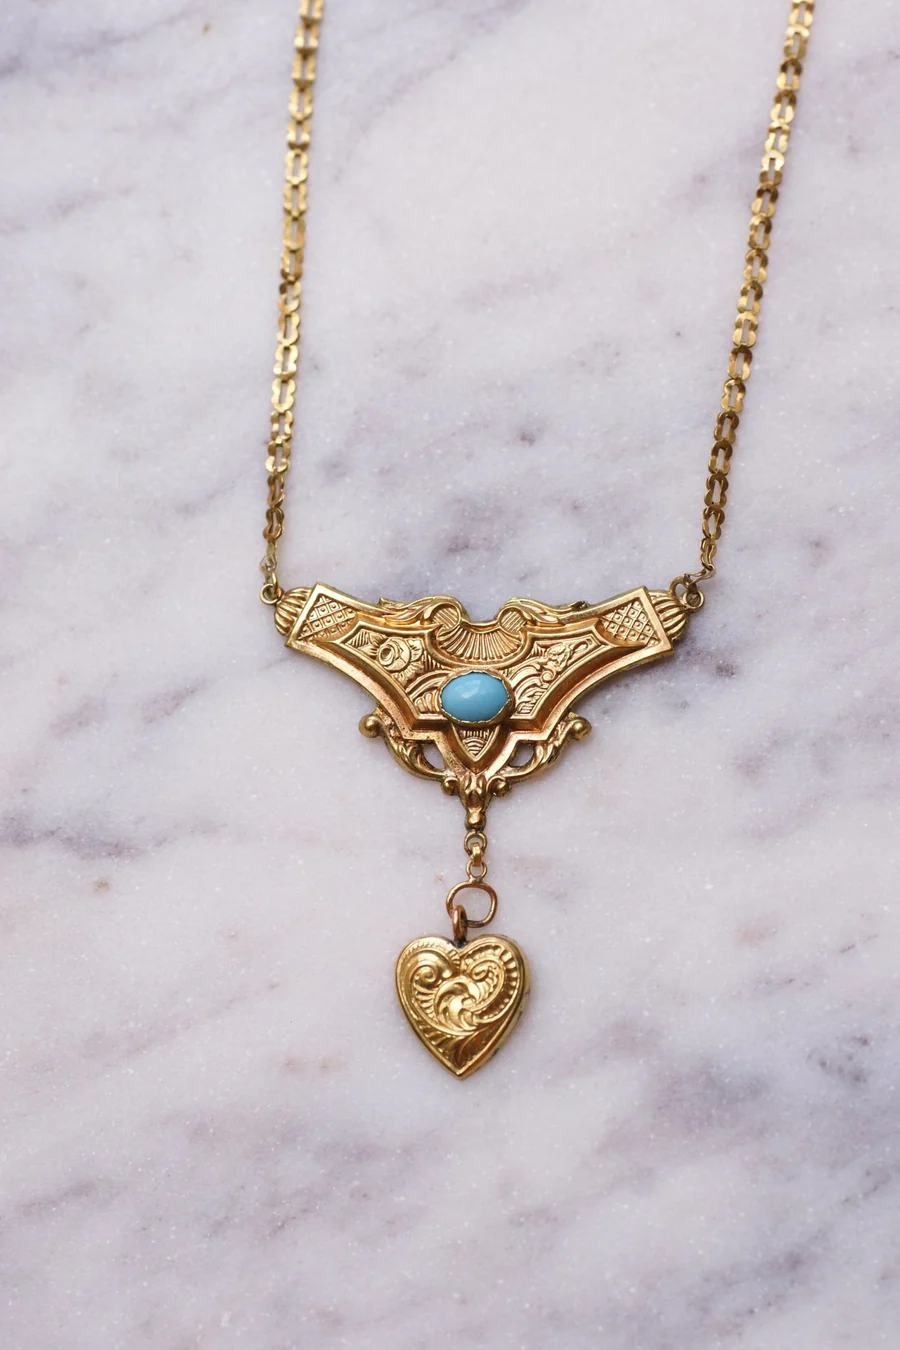 Antique gold and turquoise regional necklace - Galerie Pénélope